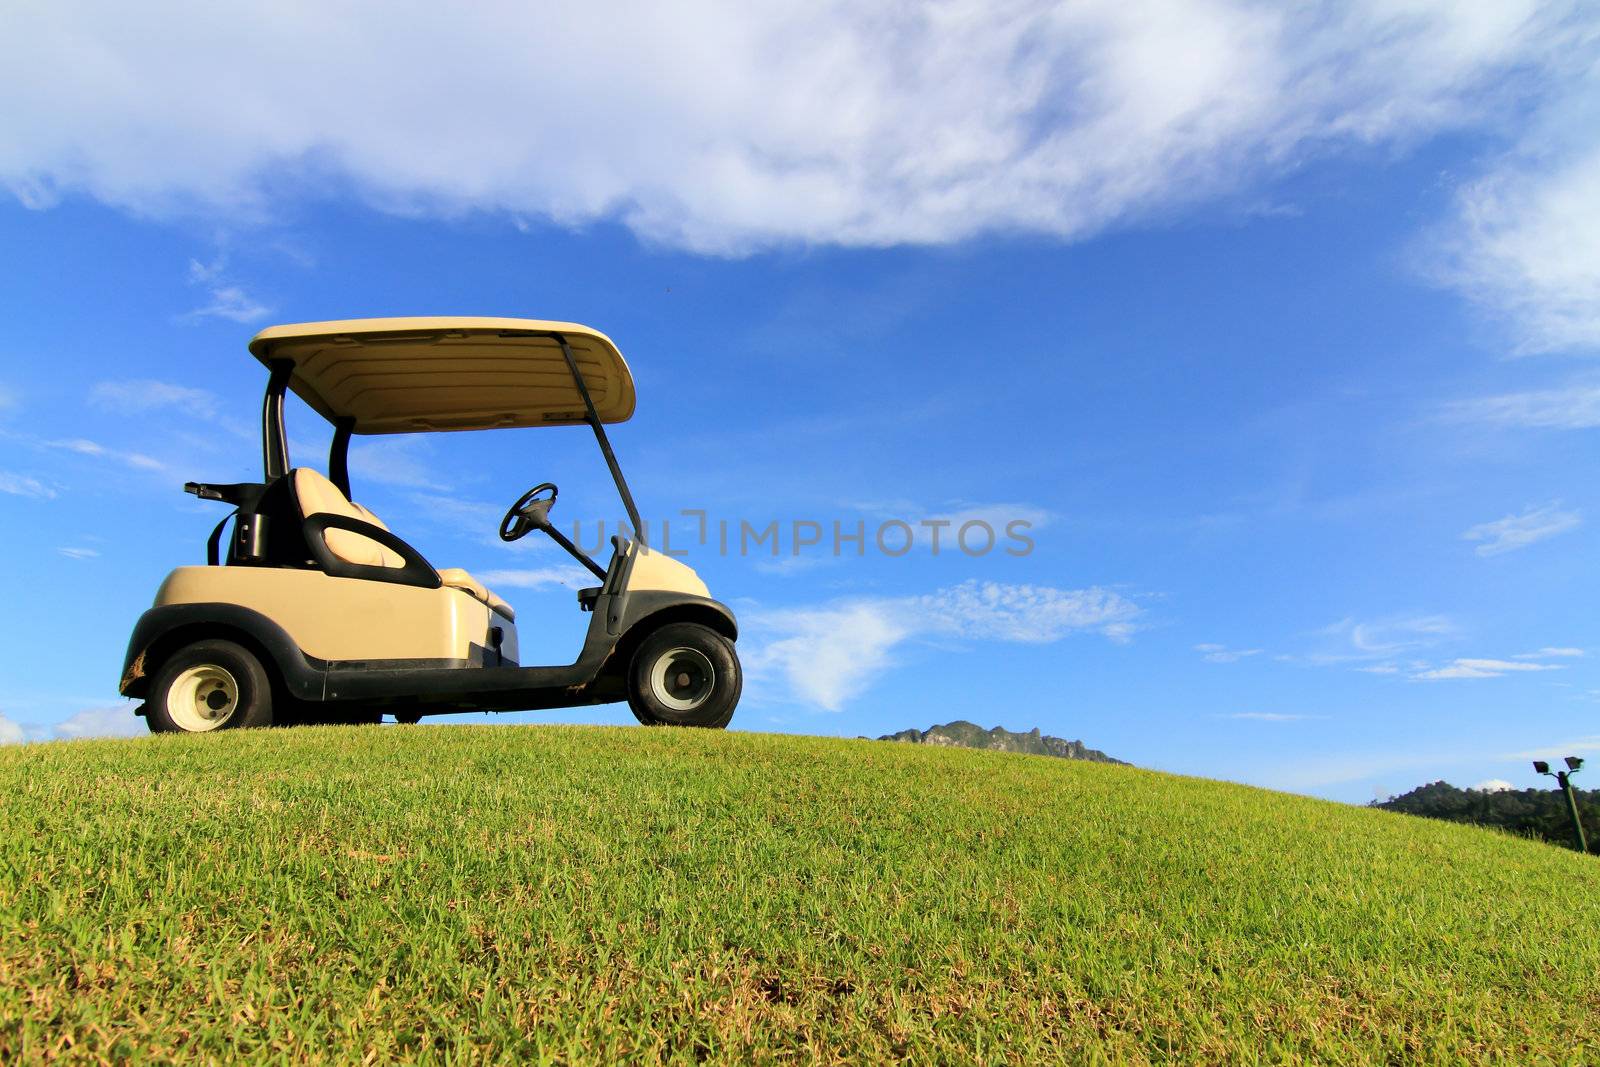 Golf cart on path, pretty green grass and blue sky background  by rufous